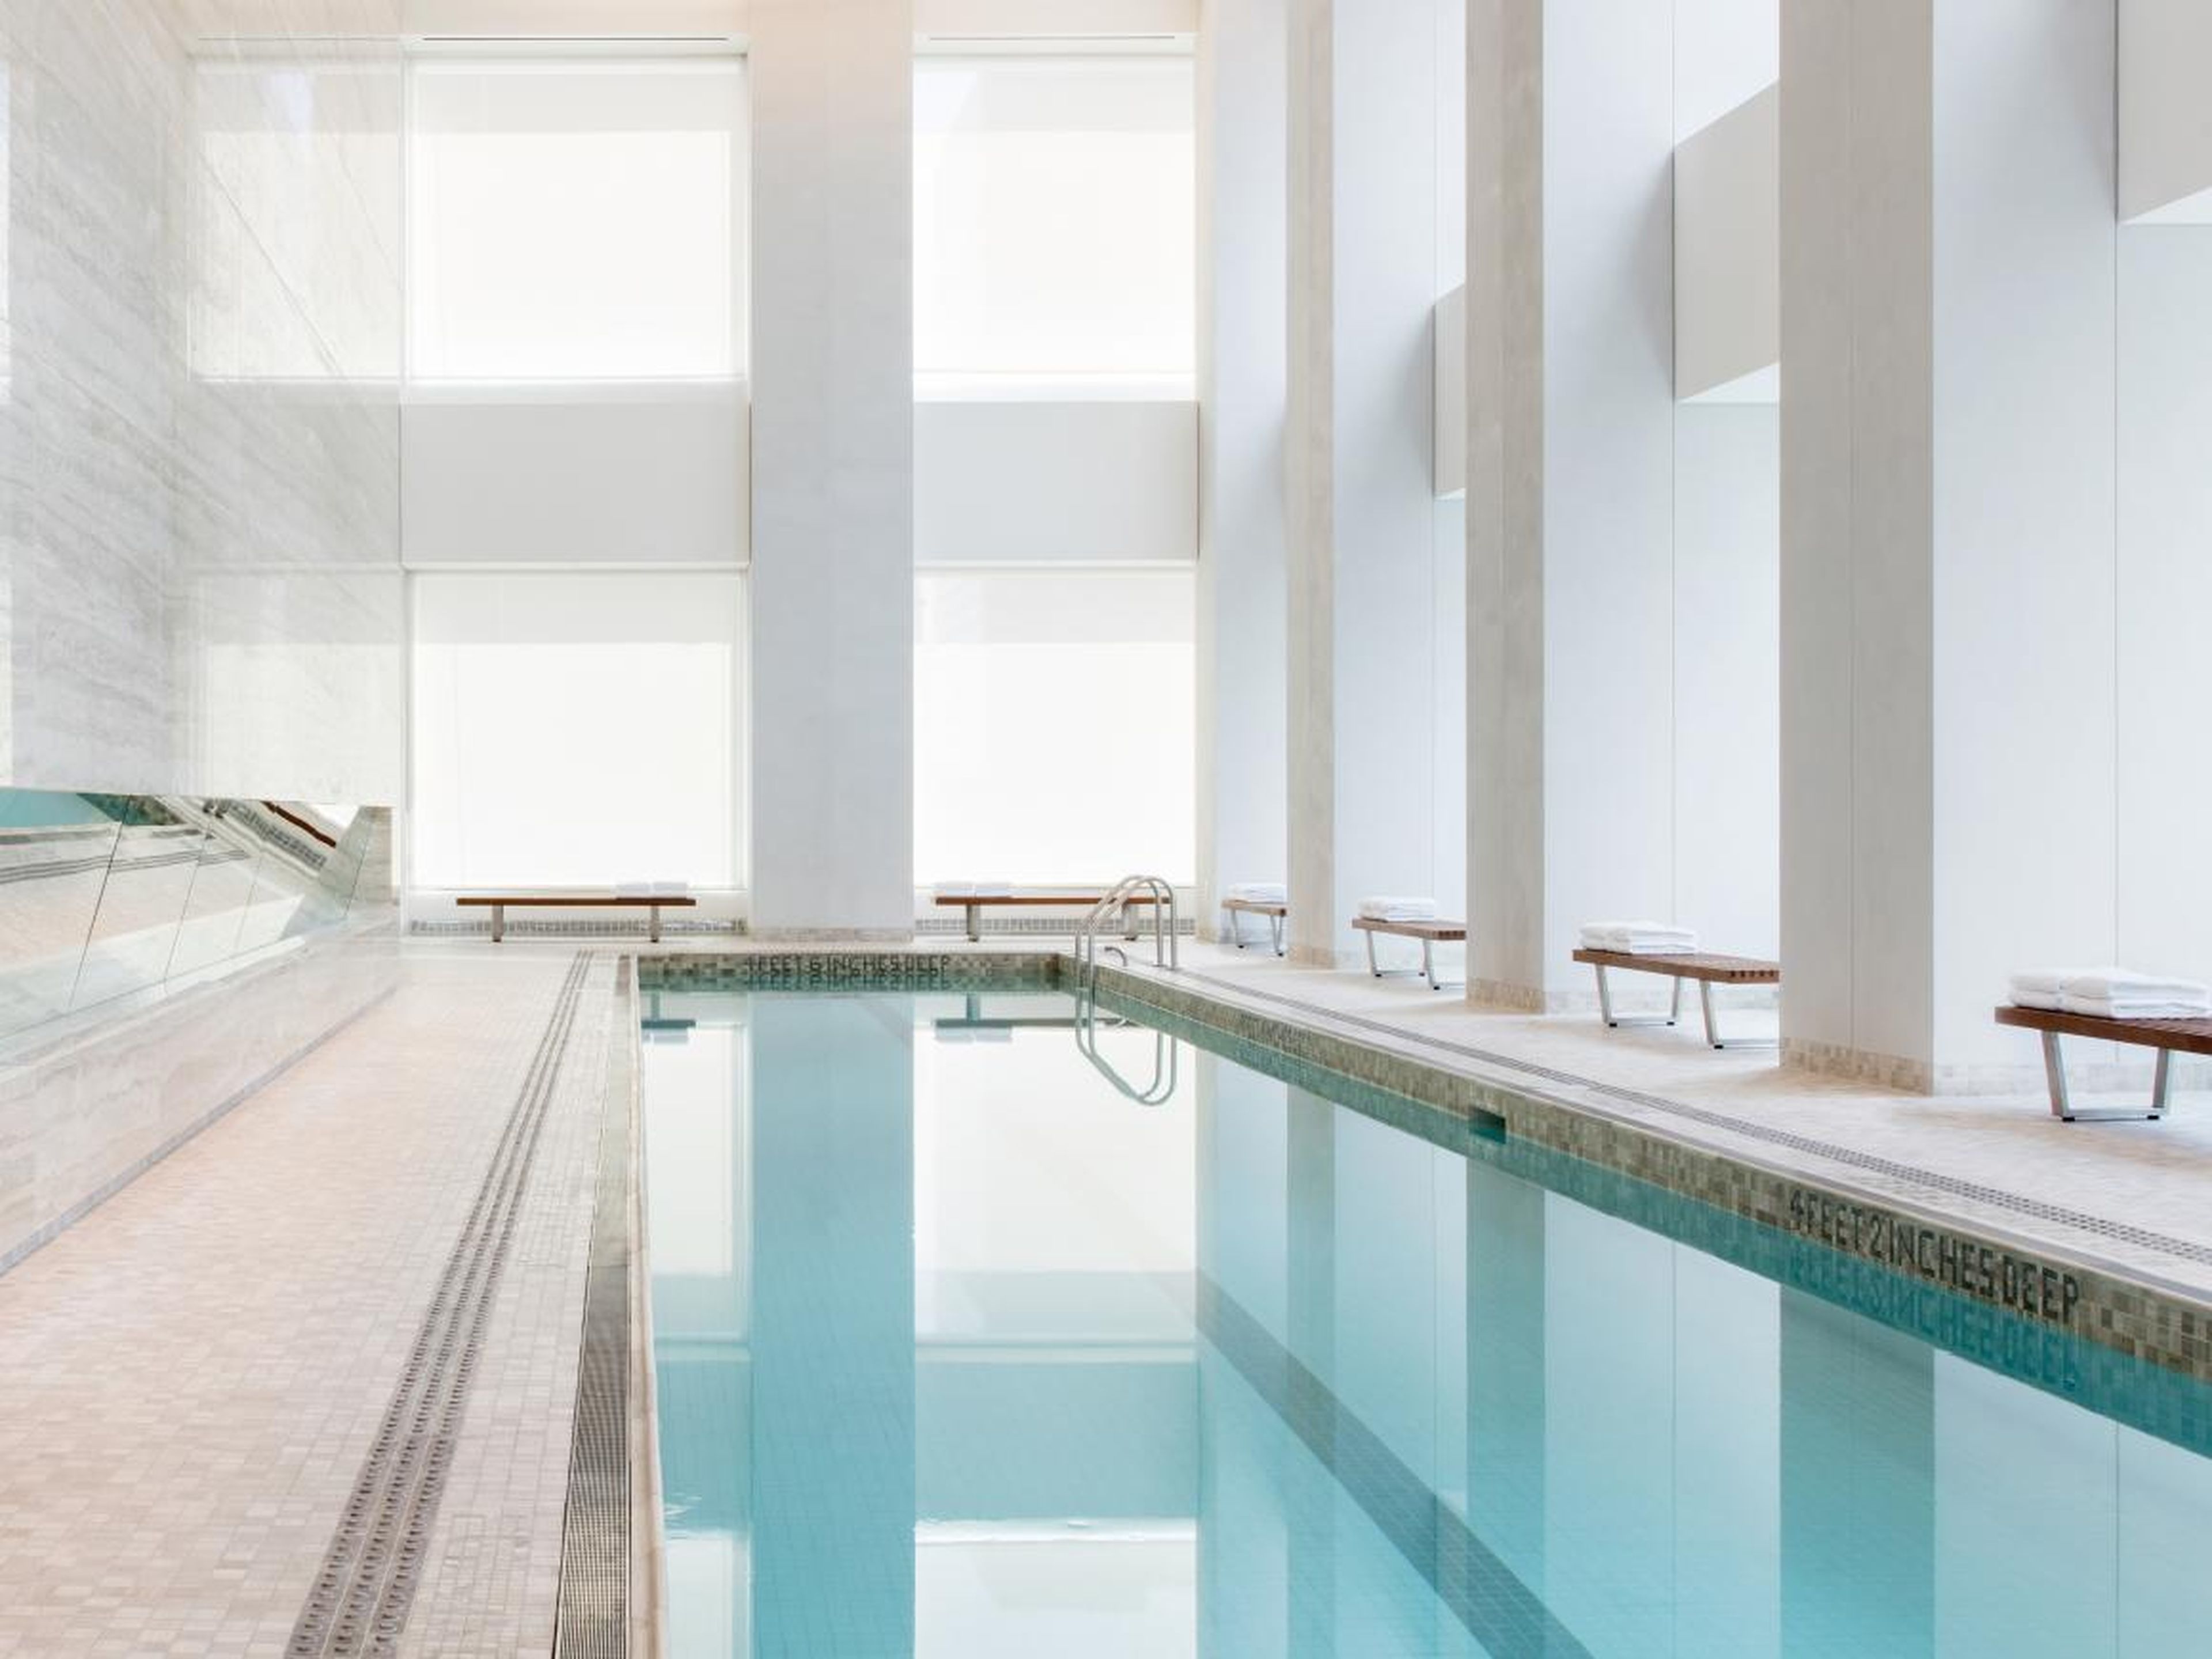 But not many residential gyms come with a 75-foot swimming pool. There's also a sauna and a steam room.